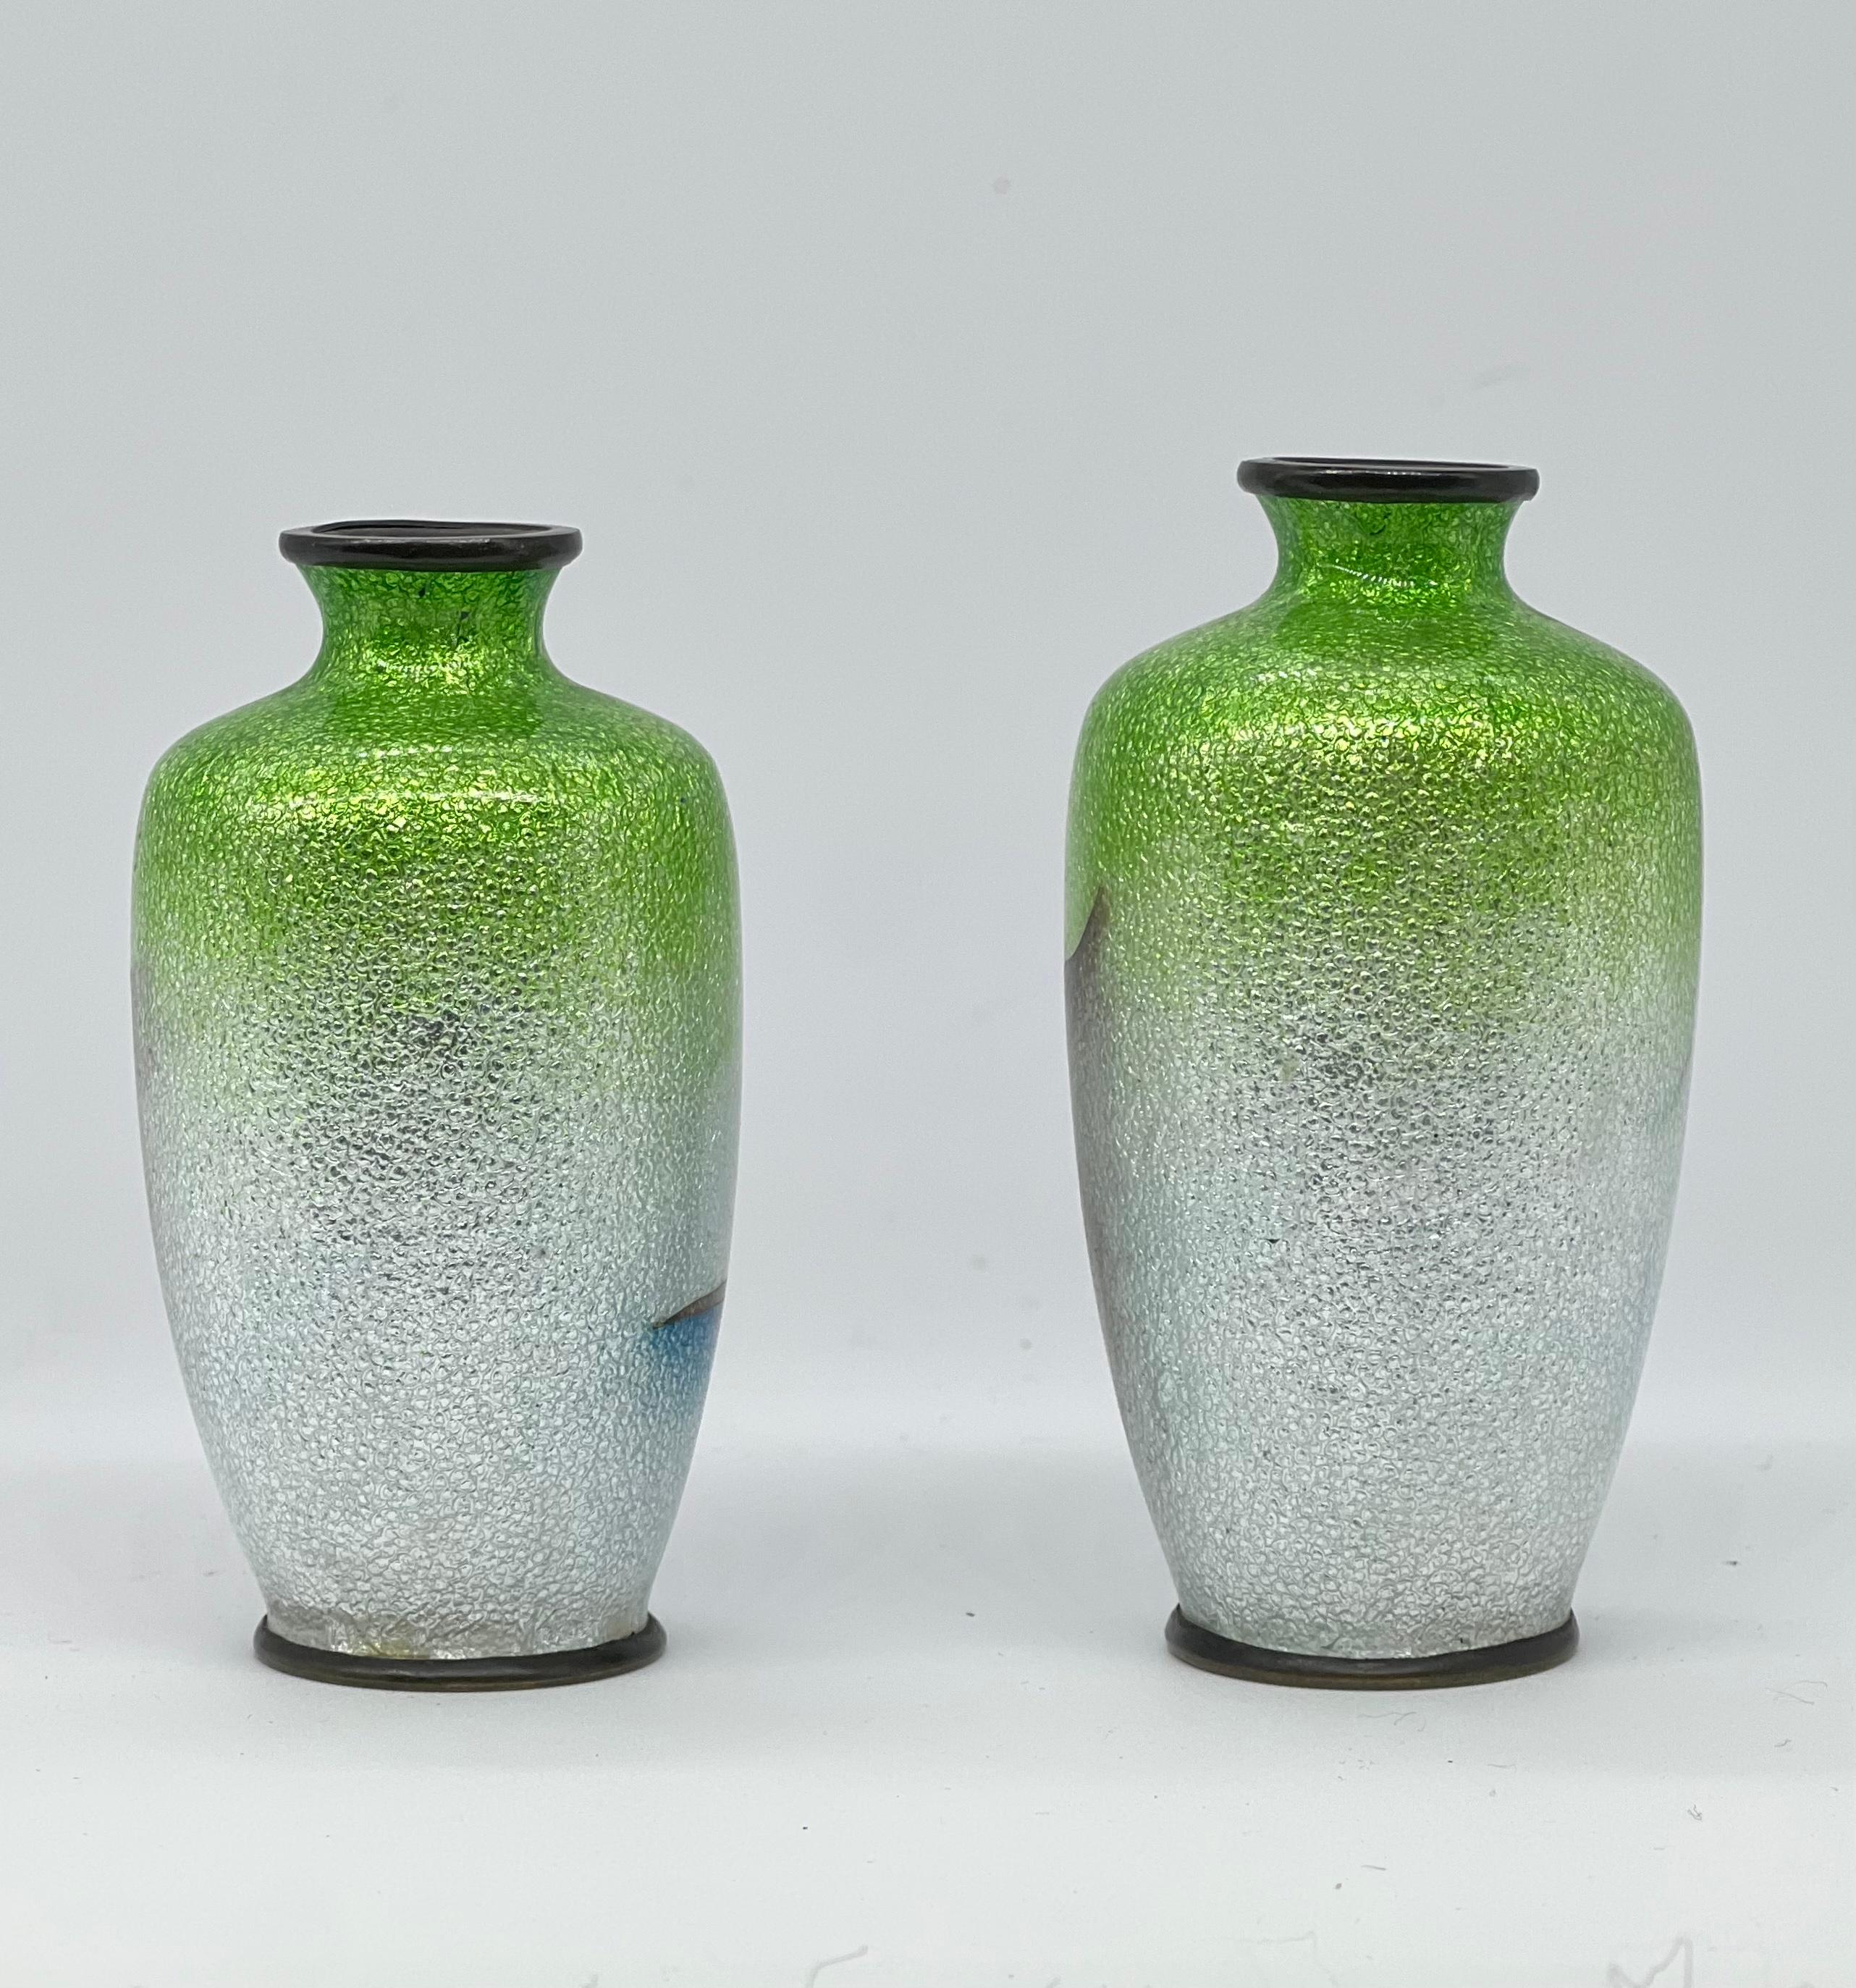 Lovely Pair of Antique Meiji Period Japanese Ginbari Cloisonne Vases, 19th C For Sale 3